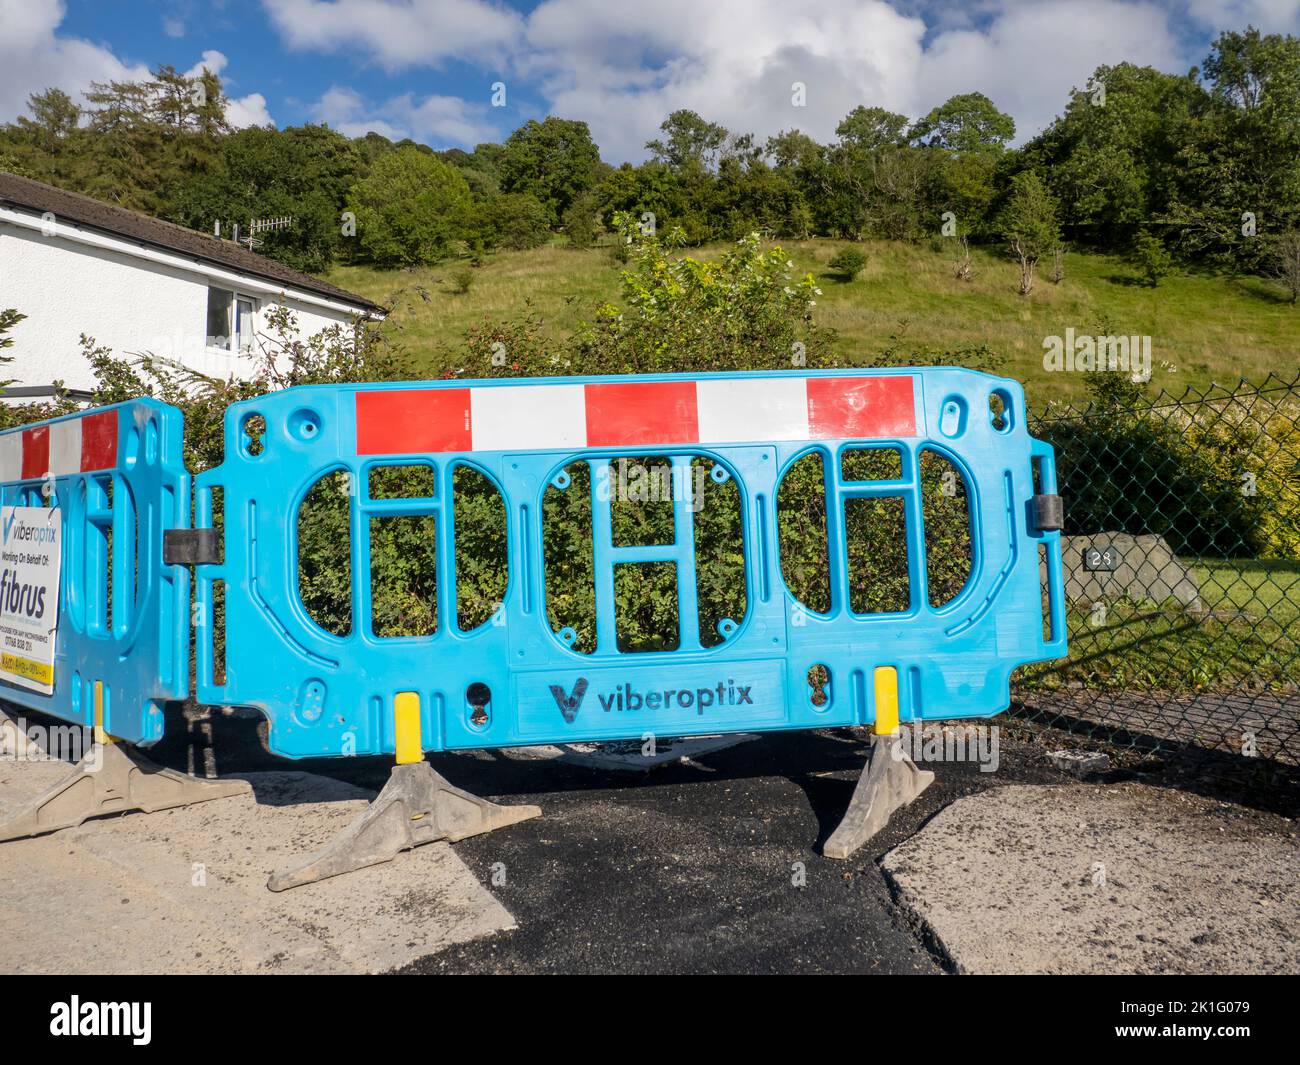 Construction work to install fibre optic broadband to a street in Ambleside, Lake District, UK. Stock Photo